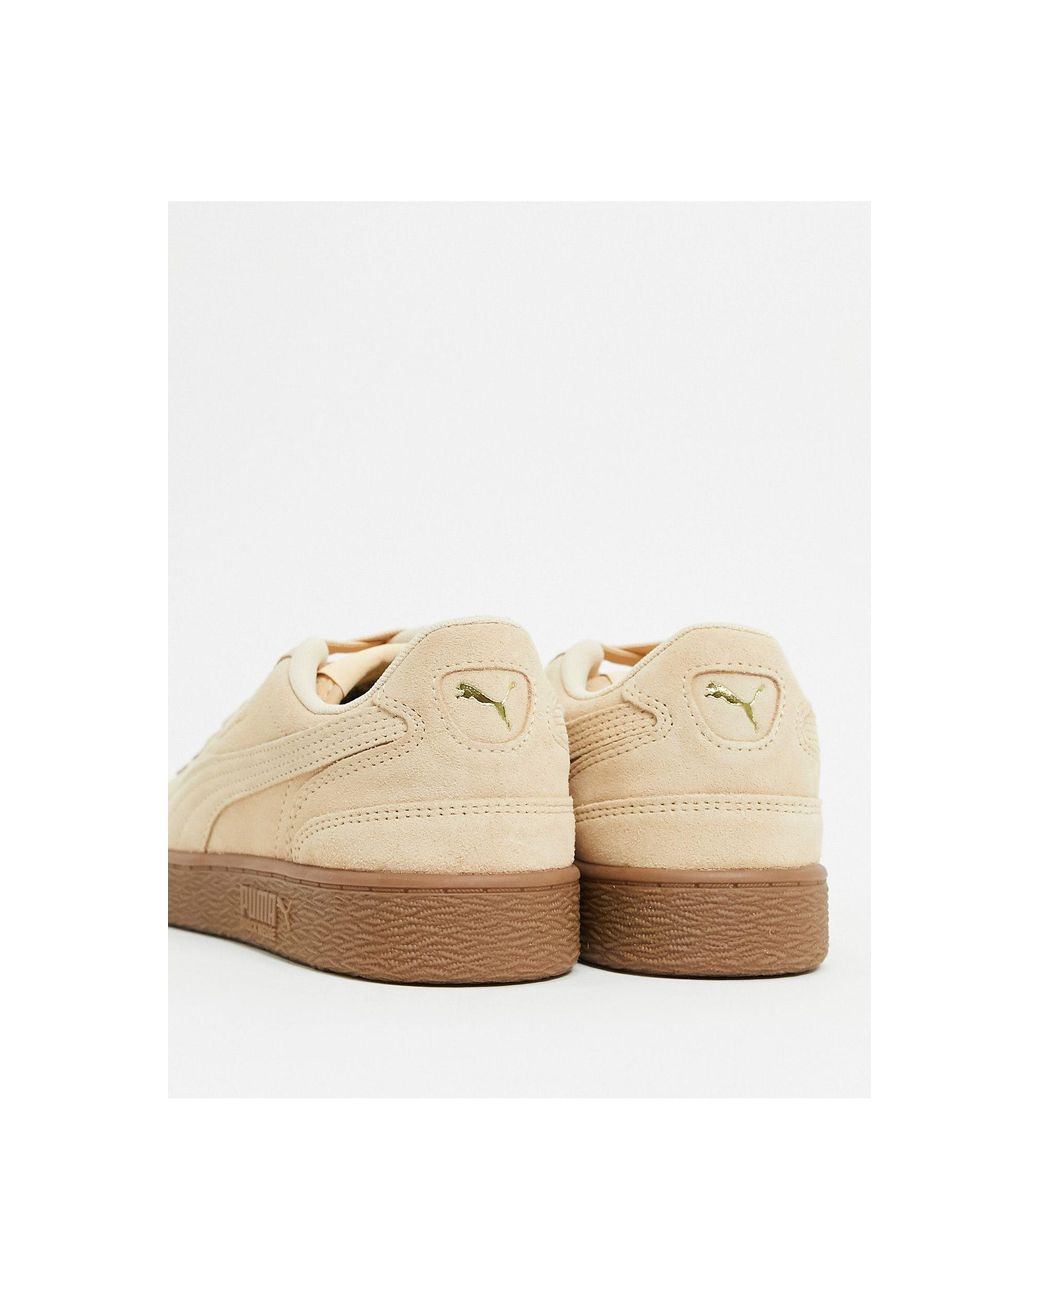 PUMA Ralph Sampson Suede Gum Sole Trainers in Brown (Natural) for Men | Lyst